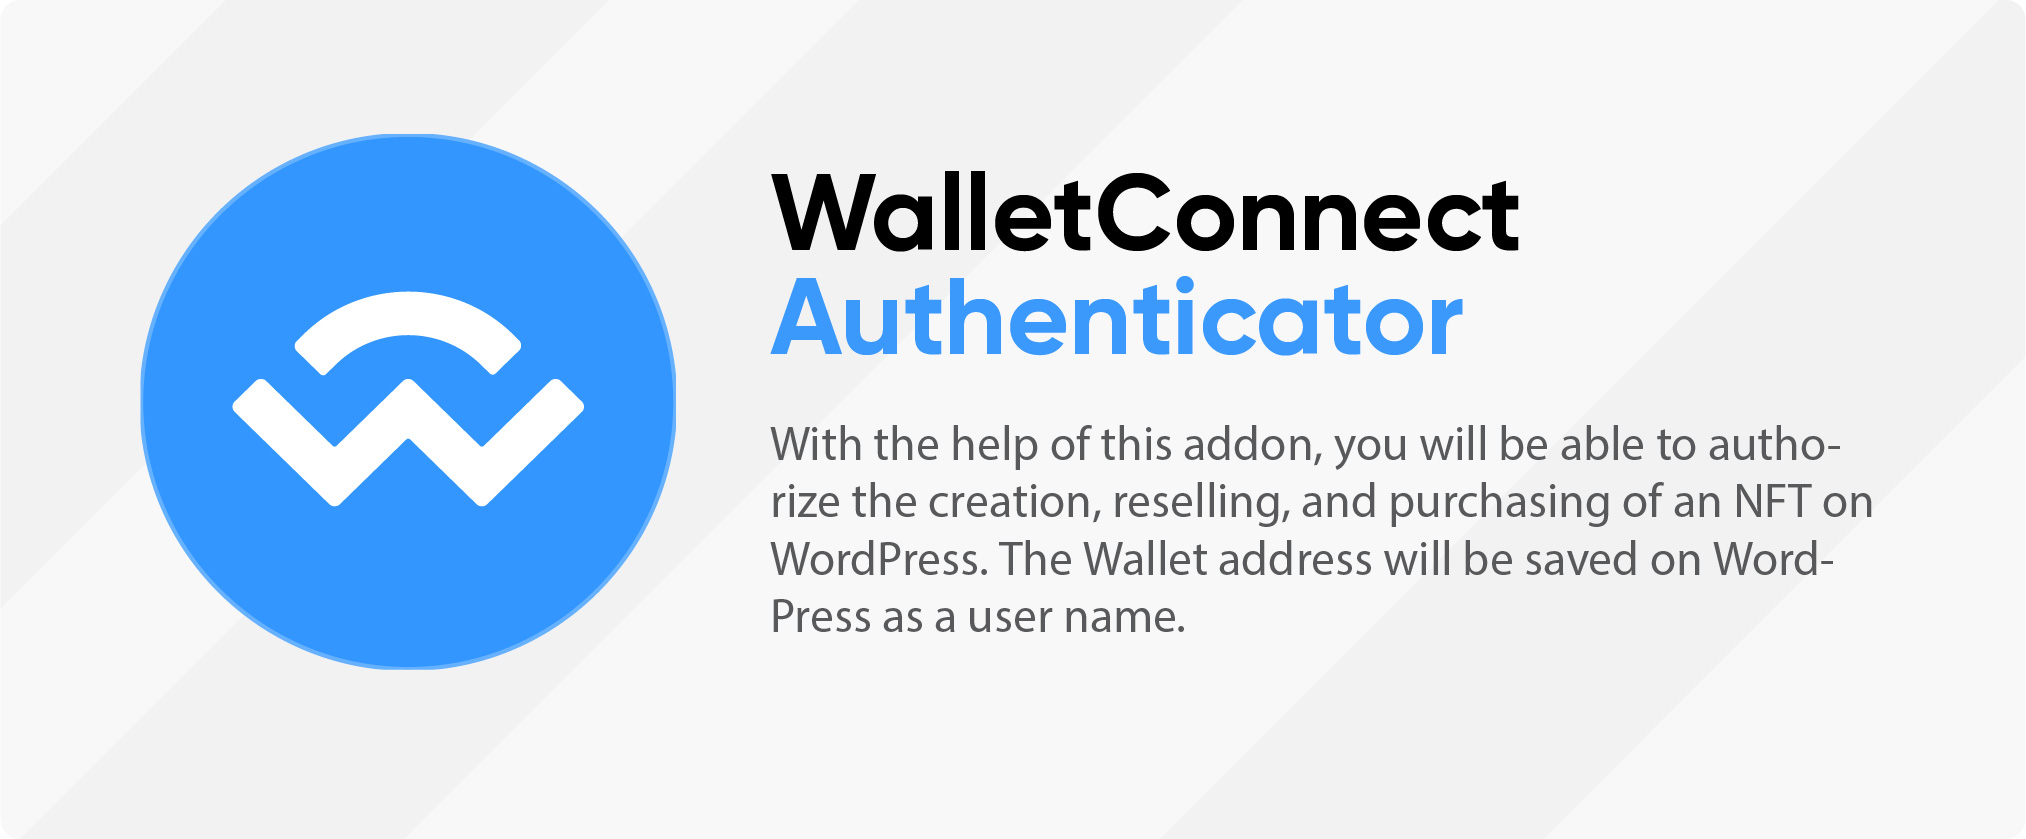 WalletConnect Authenticator is a WordPress plugin for those who are looking to start a Cryptocurrency membership website (NFT Marketplace, ICO Website or Cryptocurrency Wallet). The plugin will enable the login/registration with a WalletConnect Wallet and will save the address in WordPress.